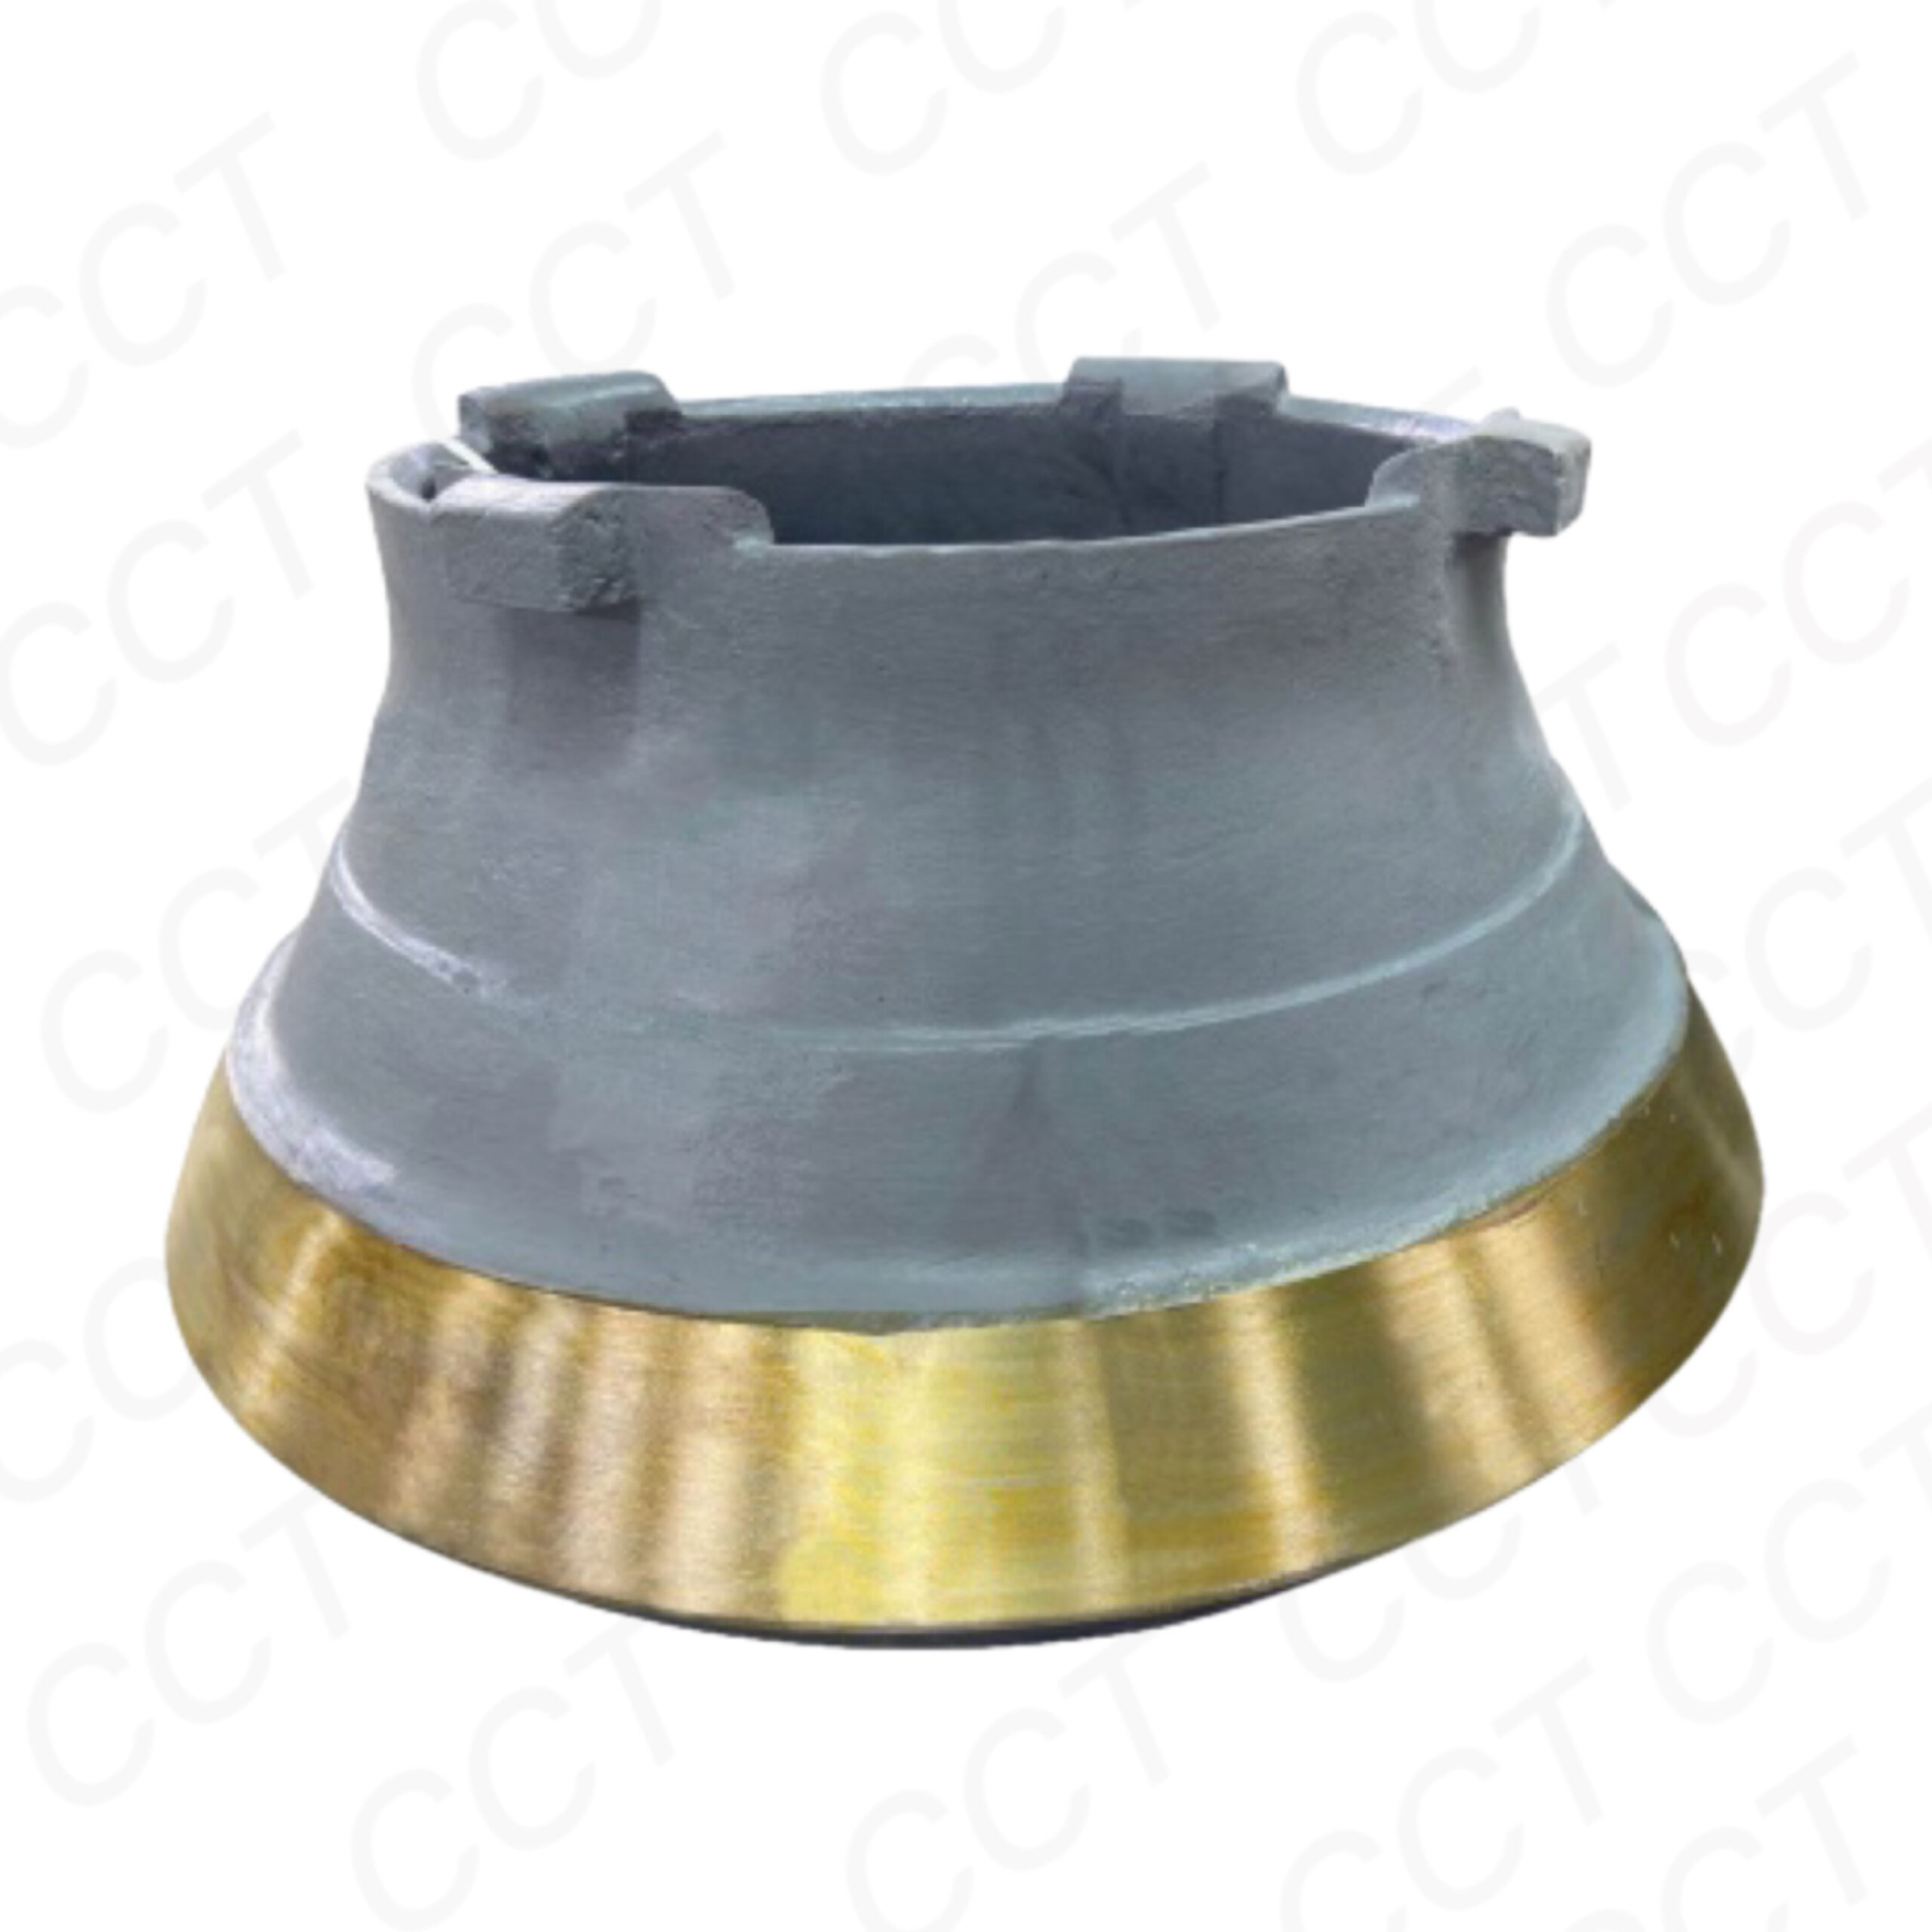 Wear Parts Stone Crusher Cone Crusher Mantle Bowl Liner